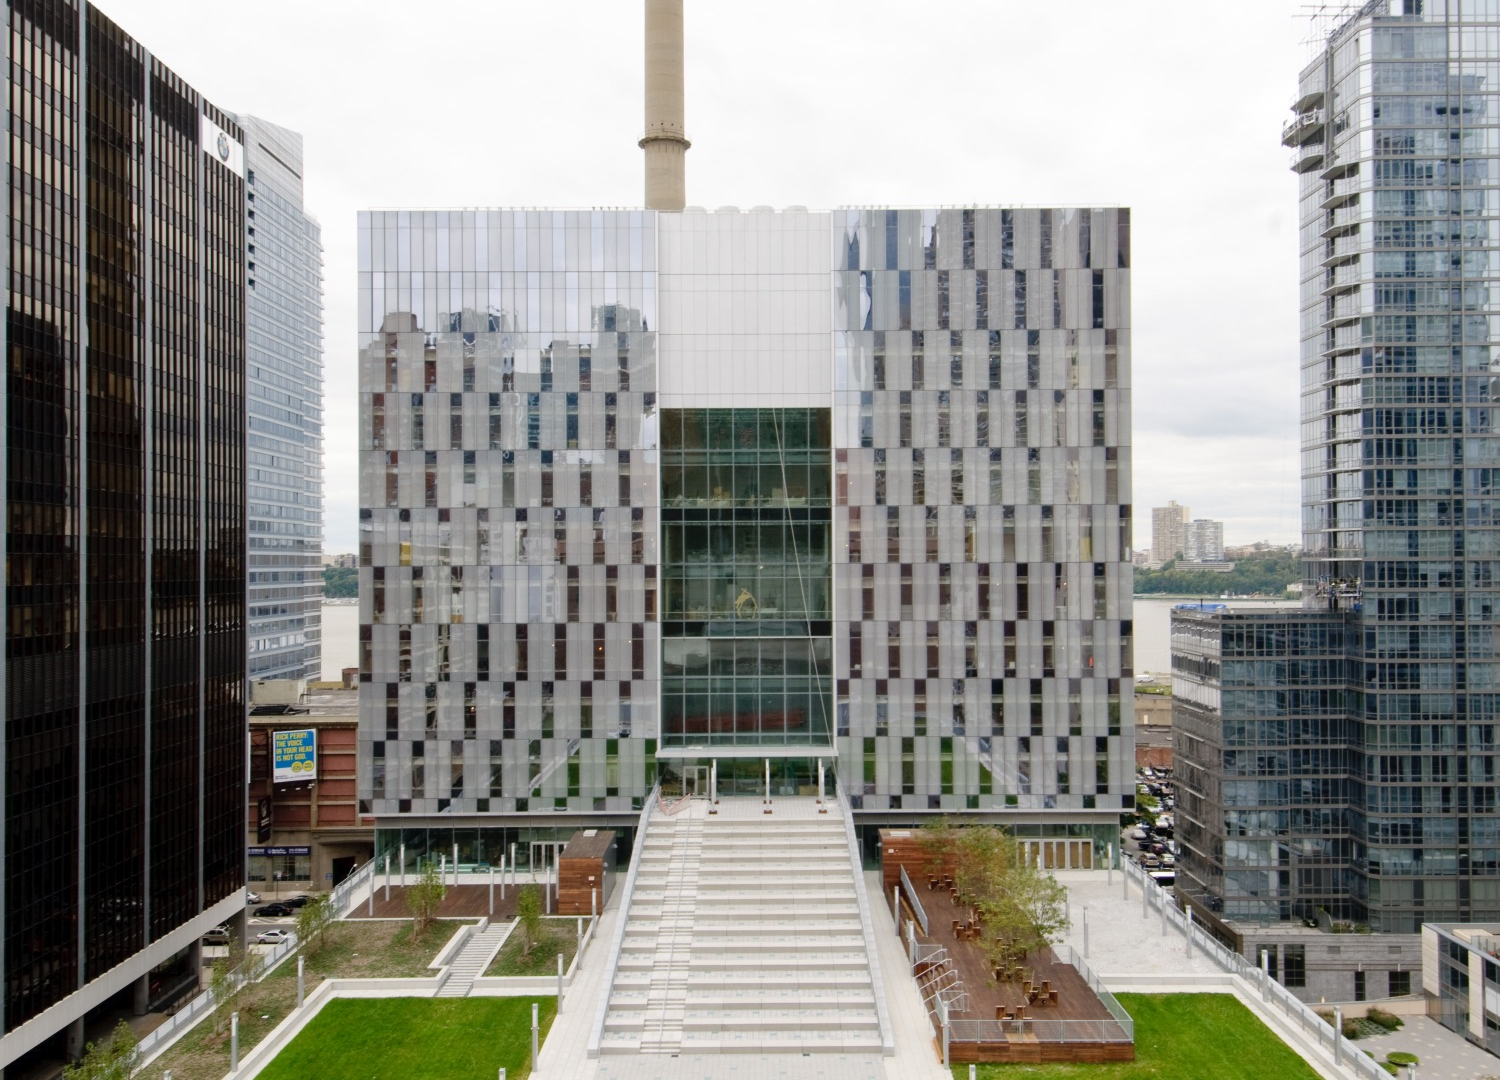 Photo of John Jay College of Criminal Justice